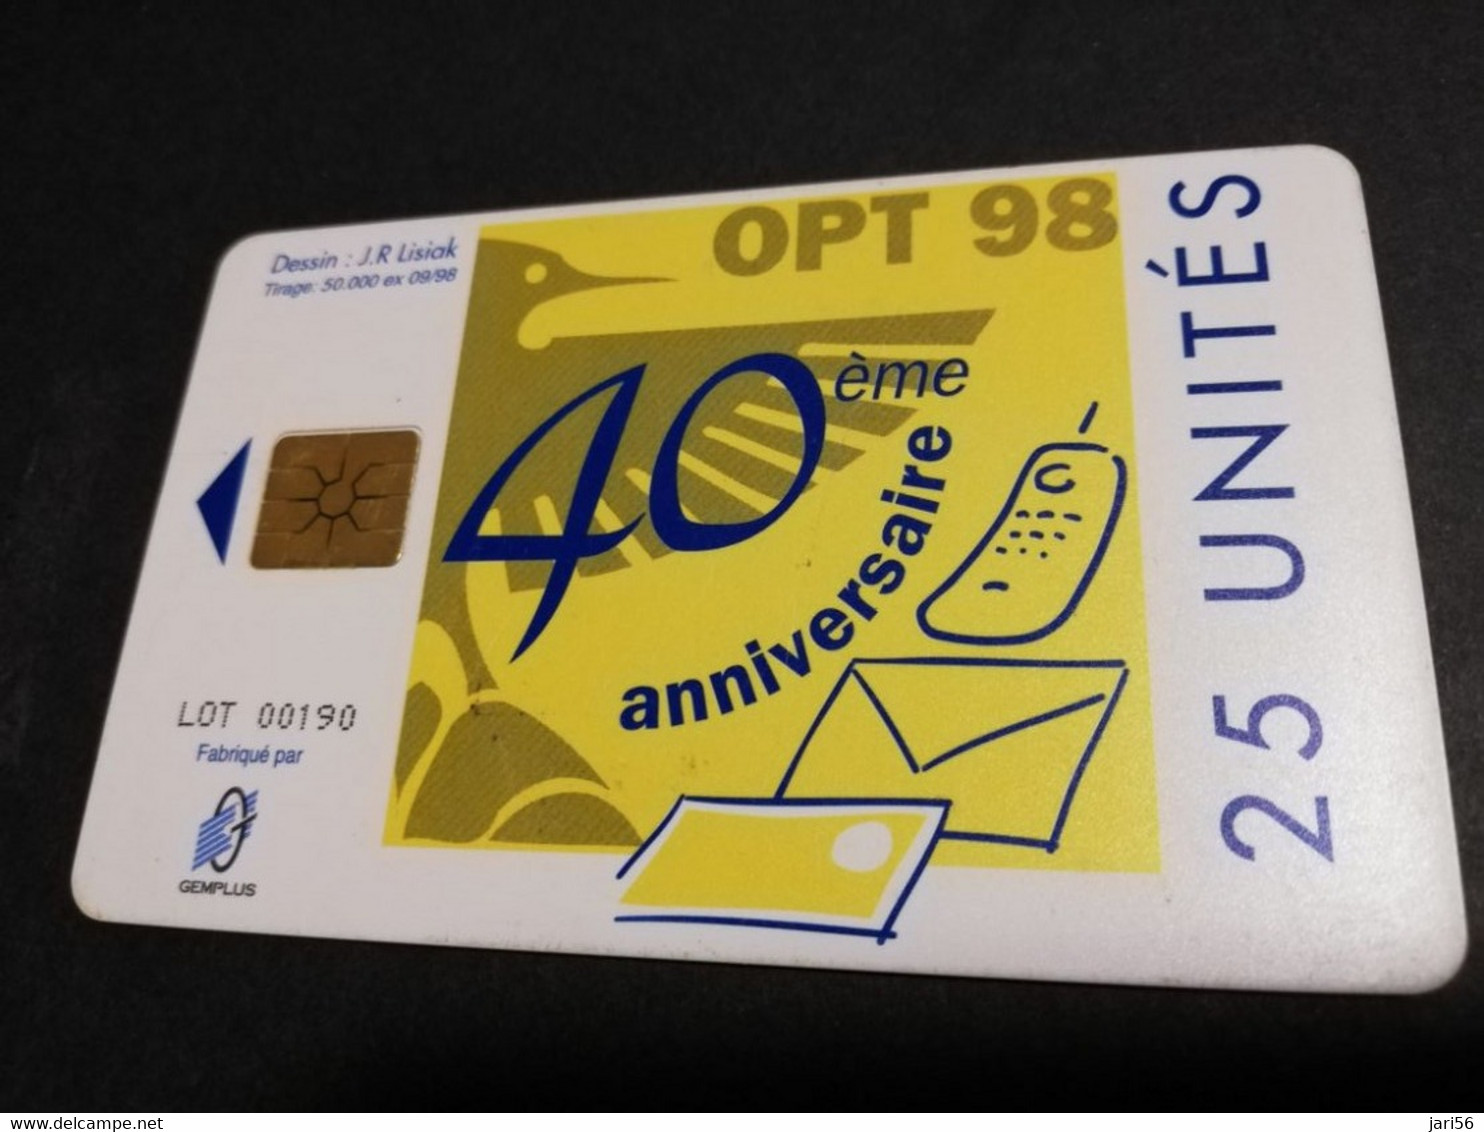 NOUVELLE CALEDONIA  CHIP CARD 25  UNITS   40EME ANNIVERSAIRE 1958-1998       ** 4186 ** - New Caledonia